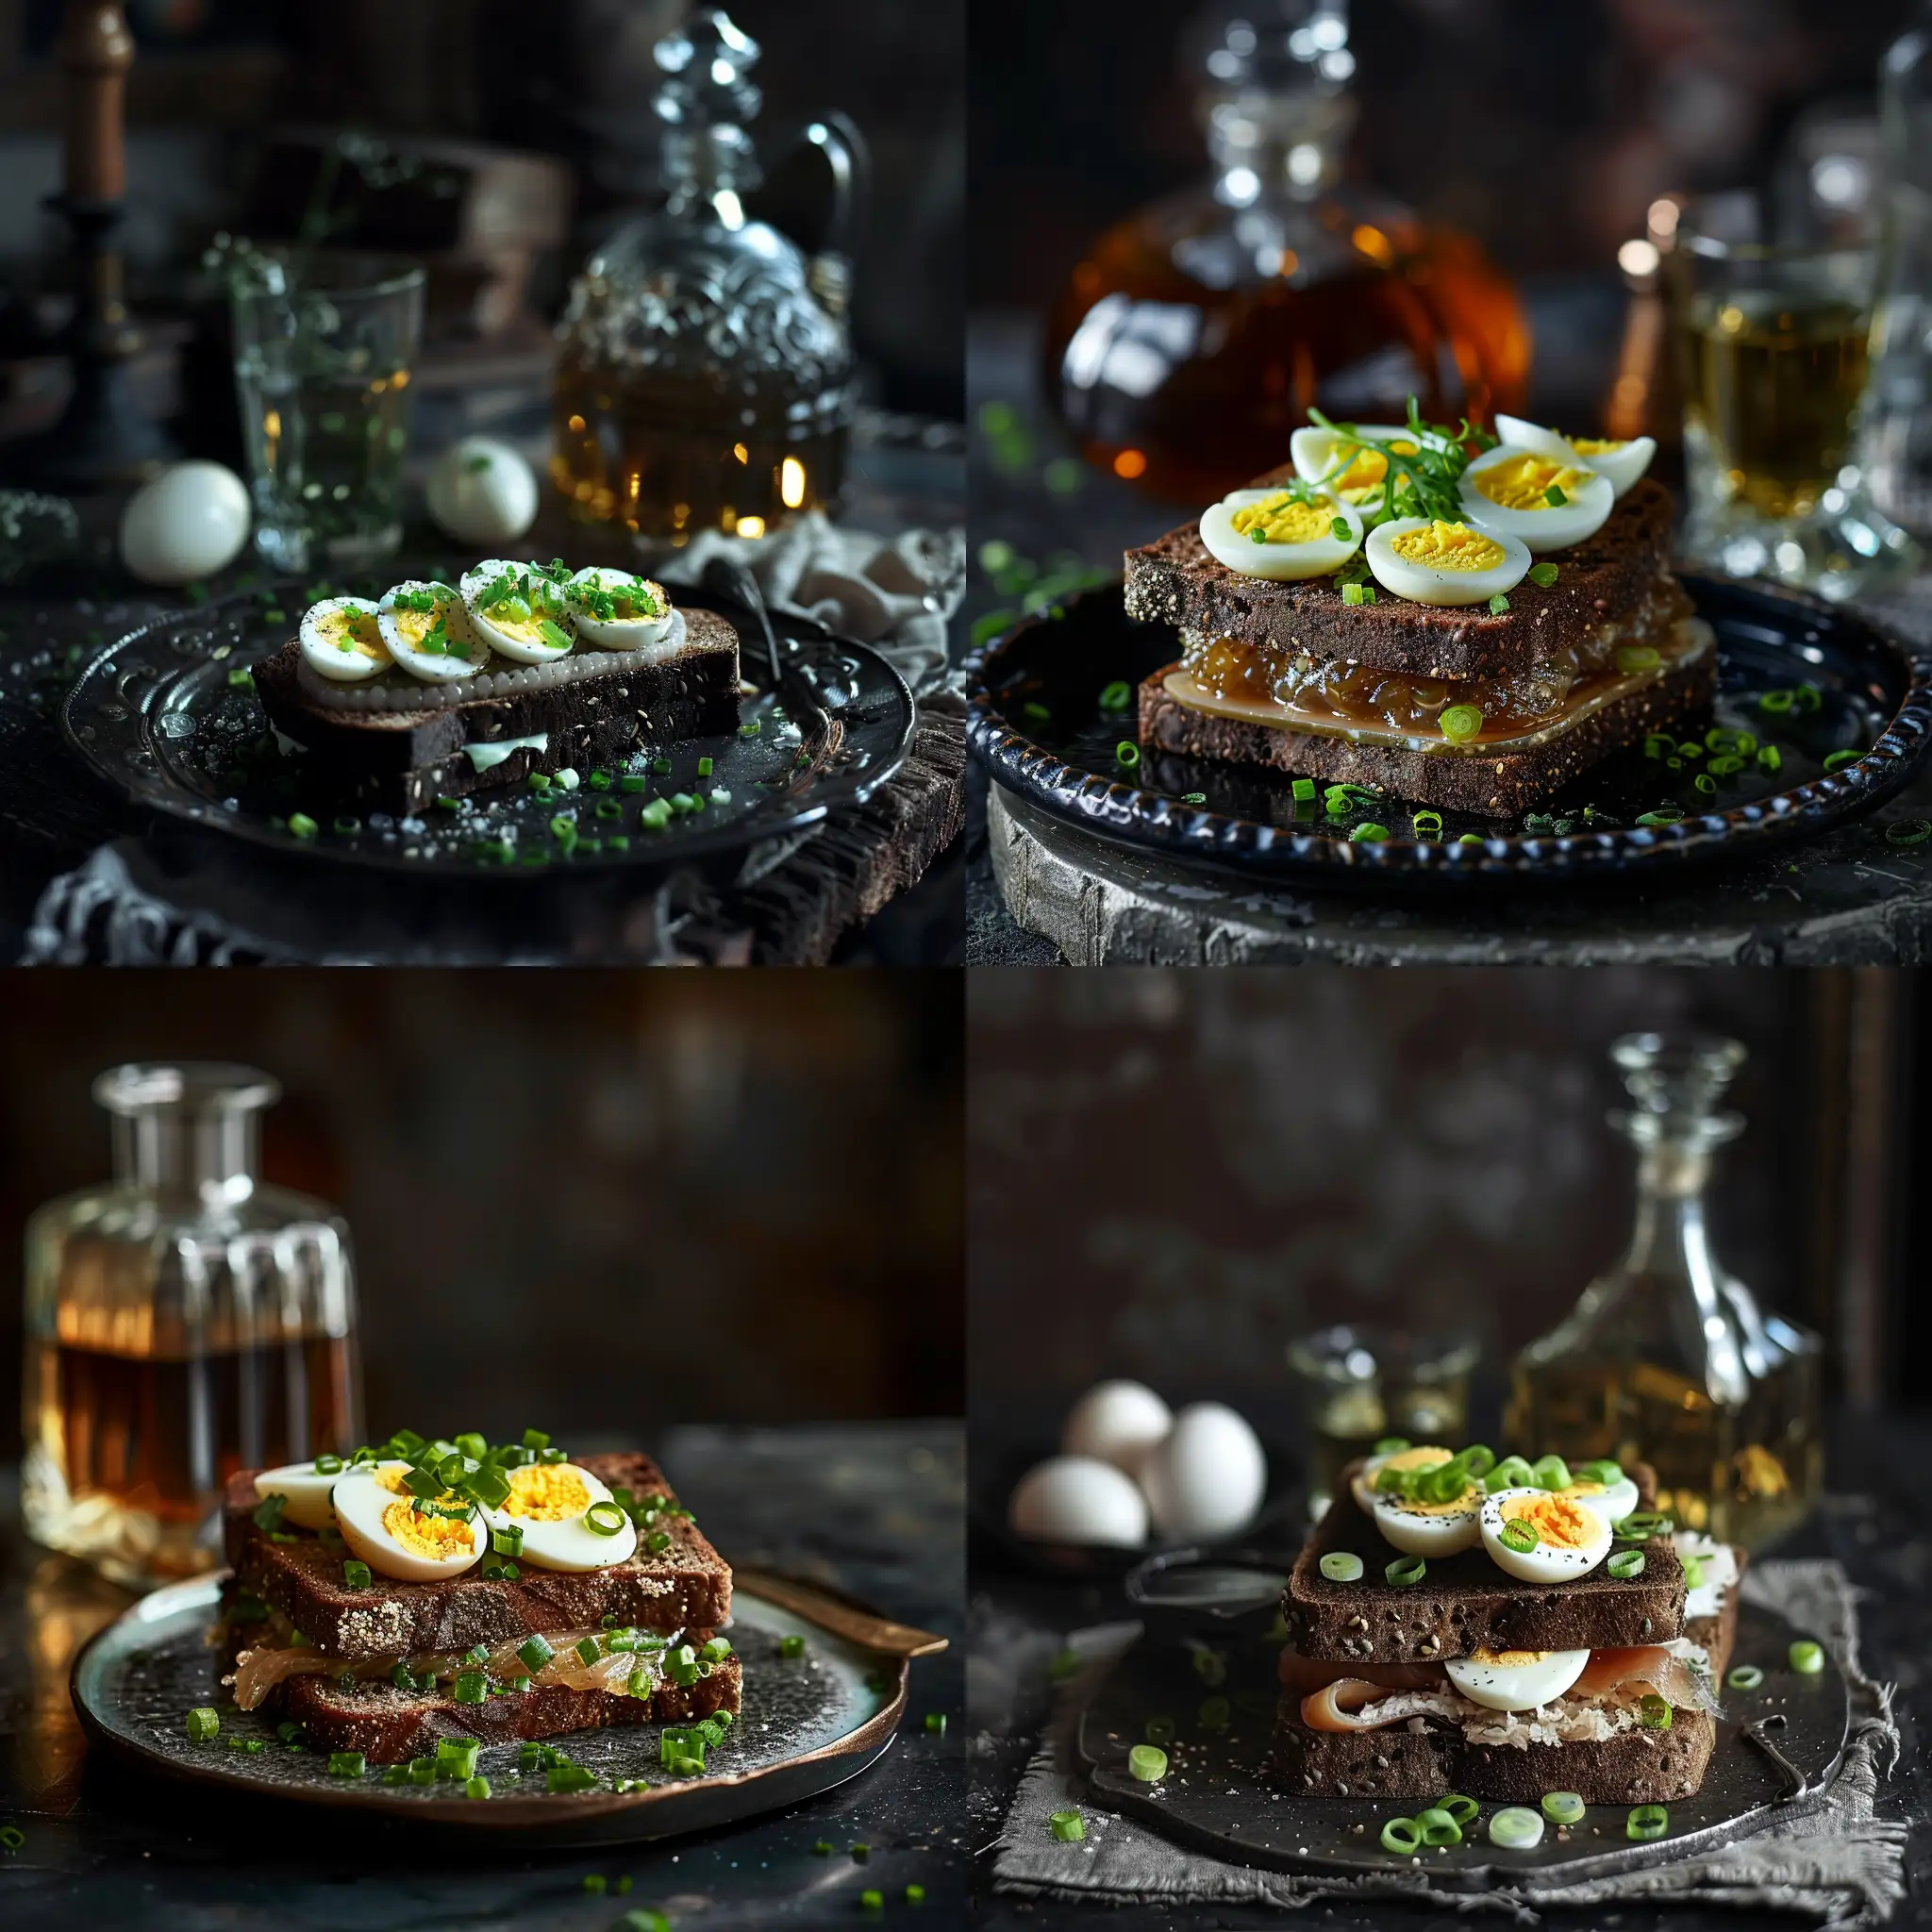 Russian-Cuisine-Herring-Sandwich-with-Vodka-and-Evening-Ambiance